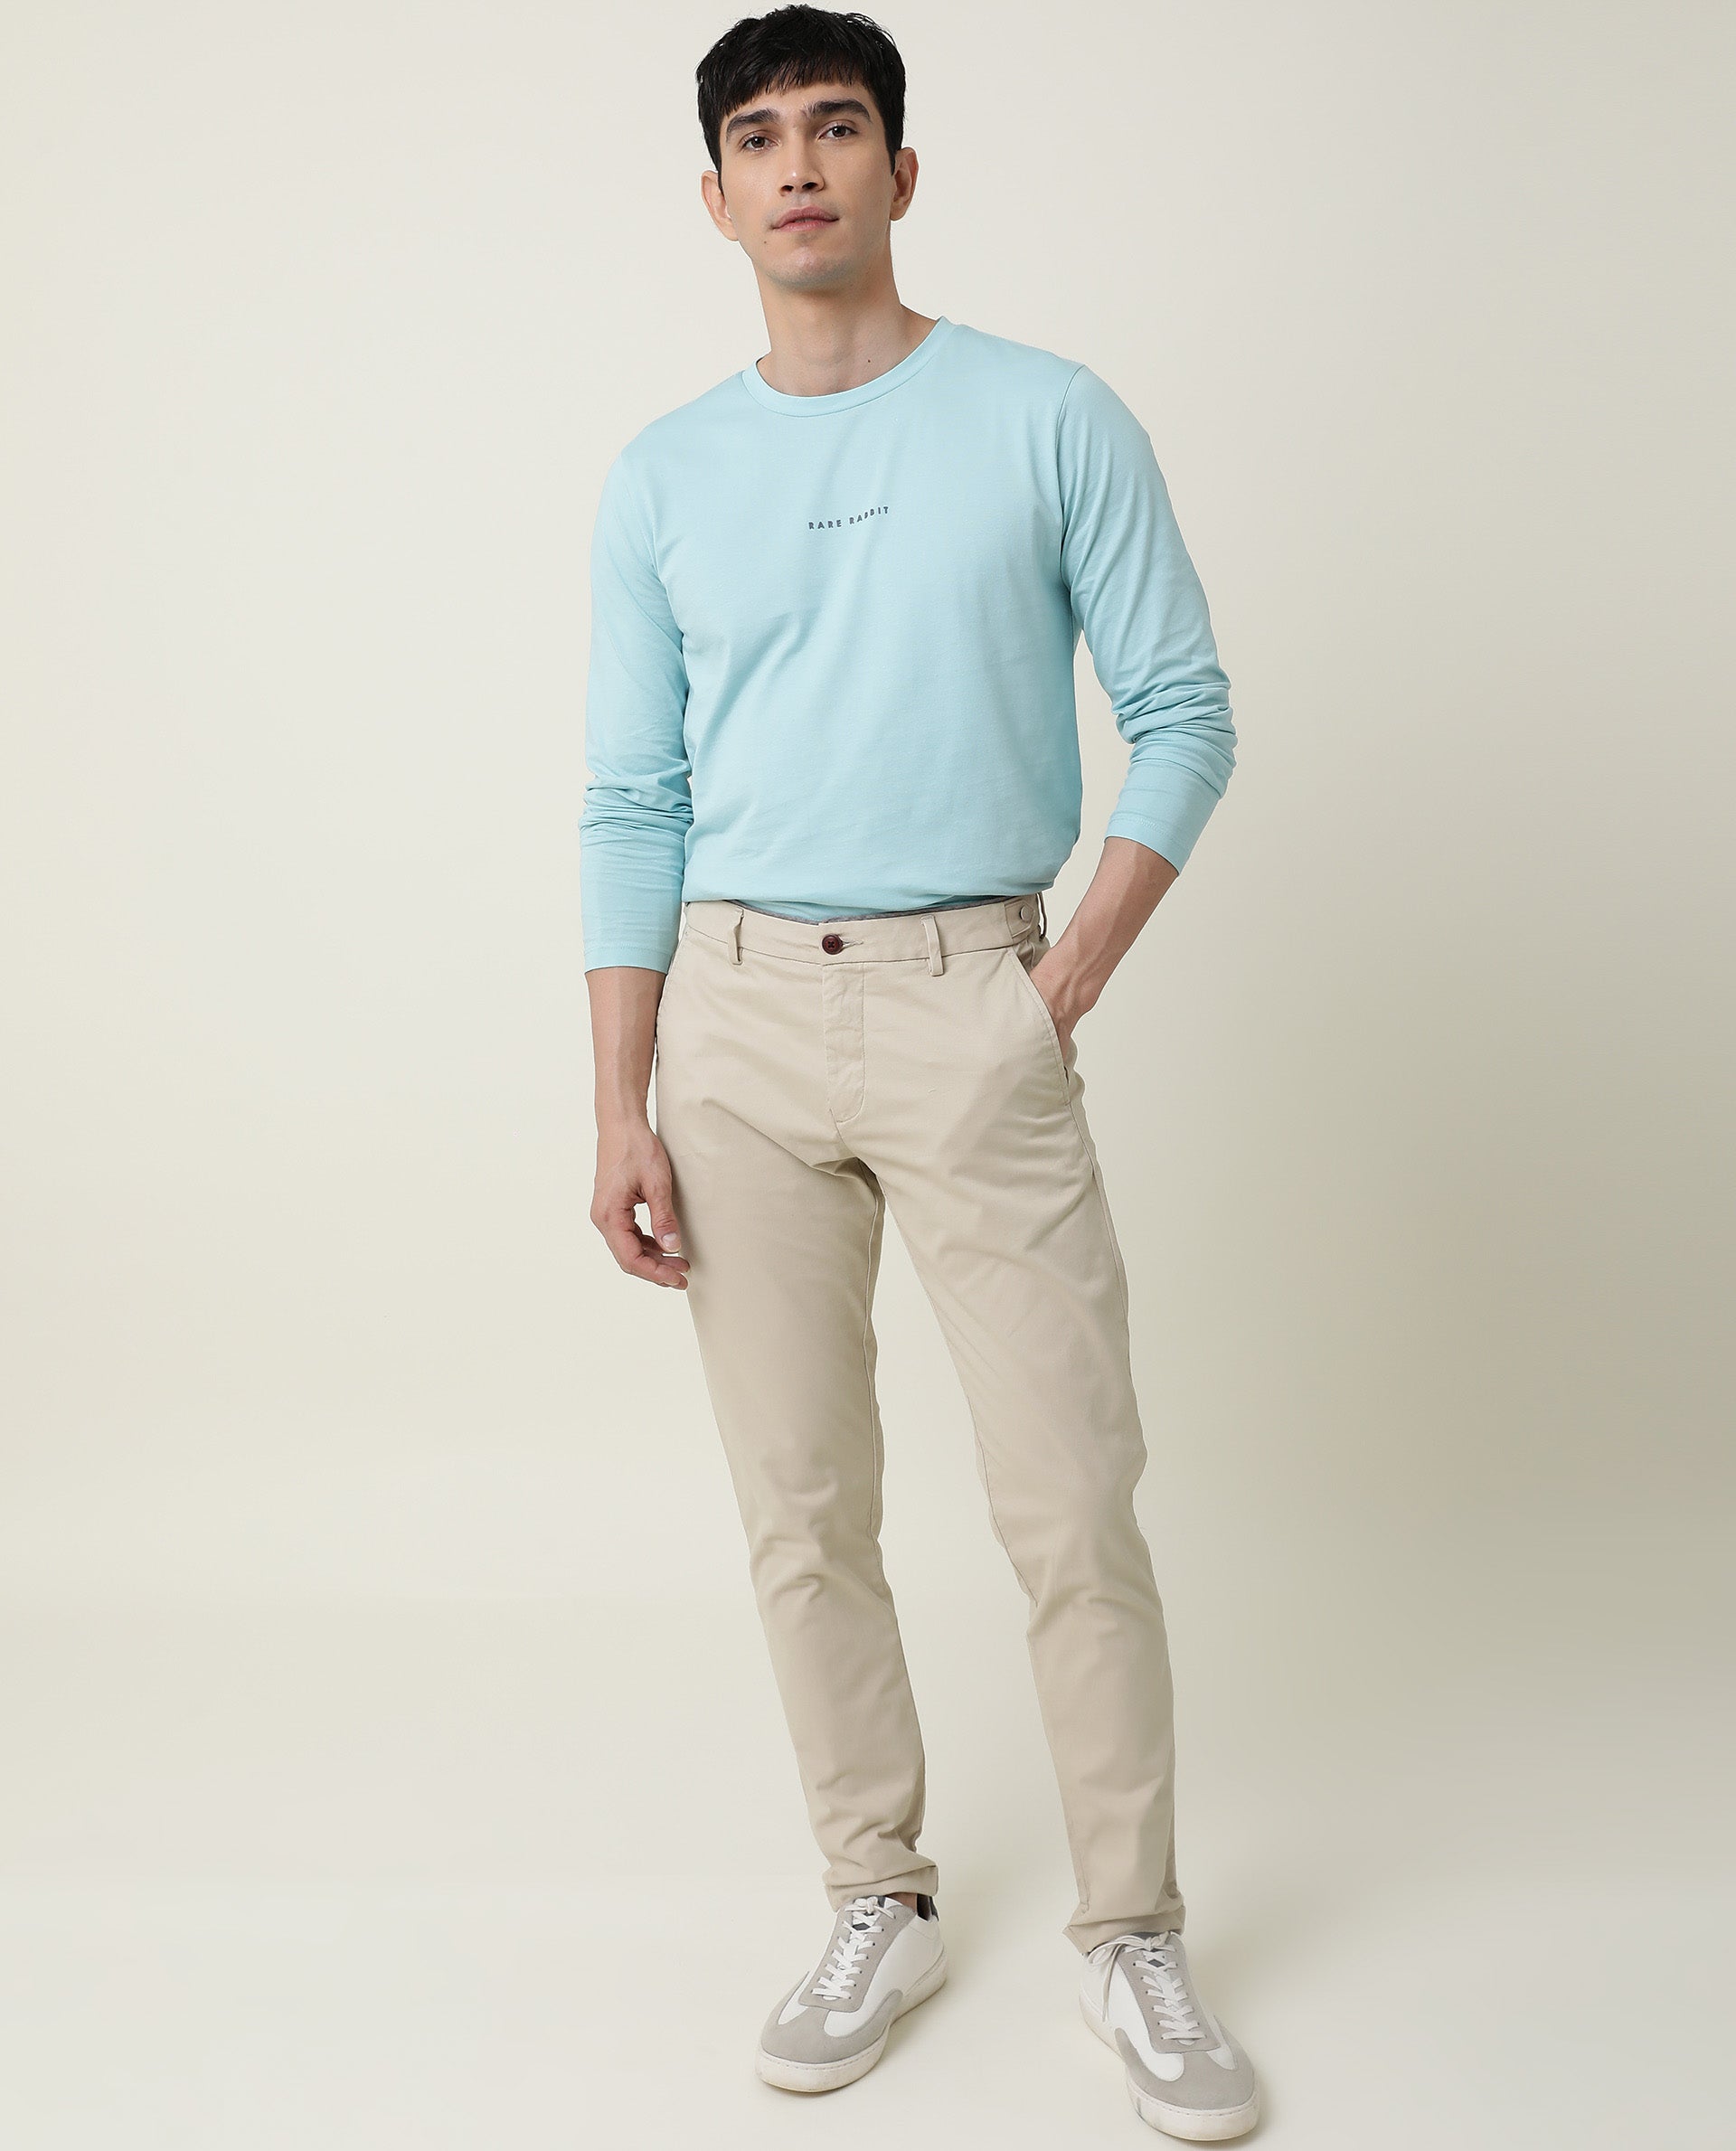 Khaki Jeans with Blue Crew-neck T-shirt Outfits For Men (13 ideas &  outfits) | Lookastic